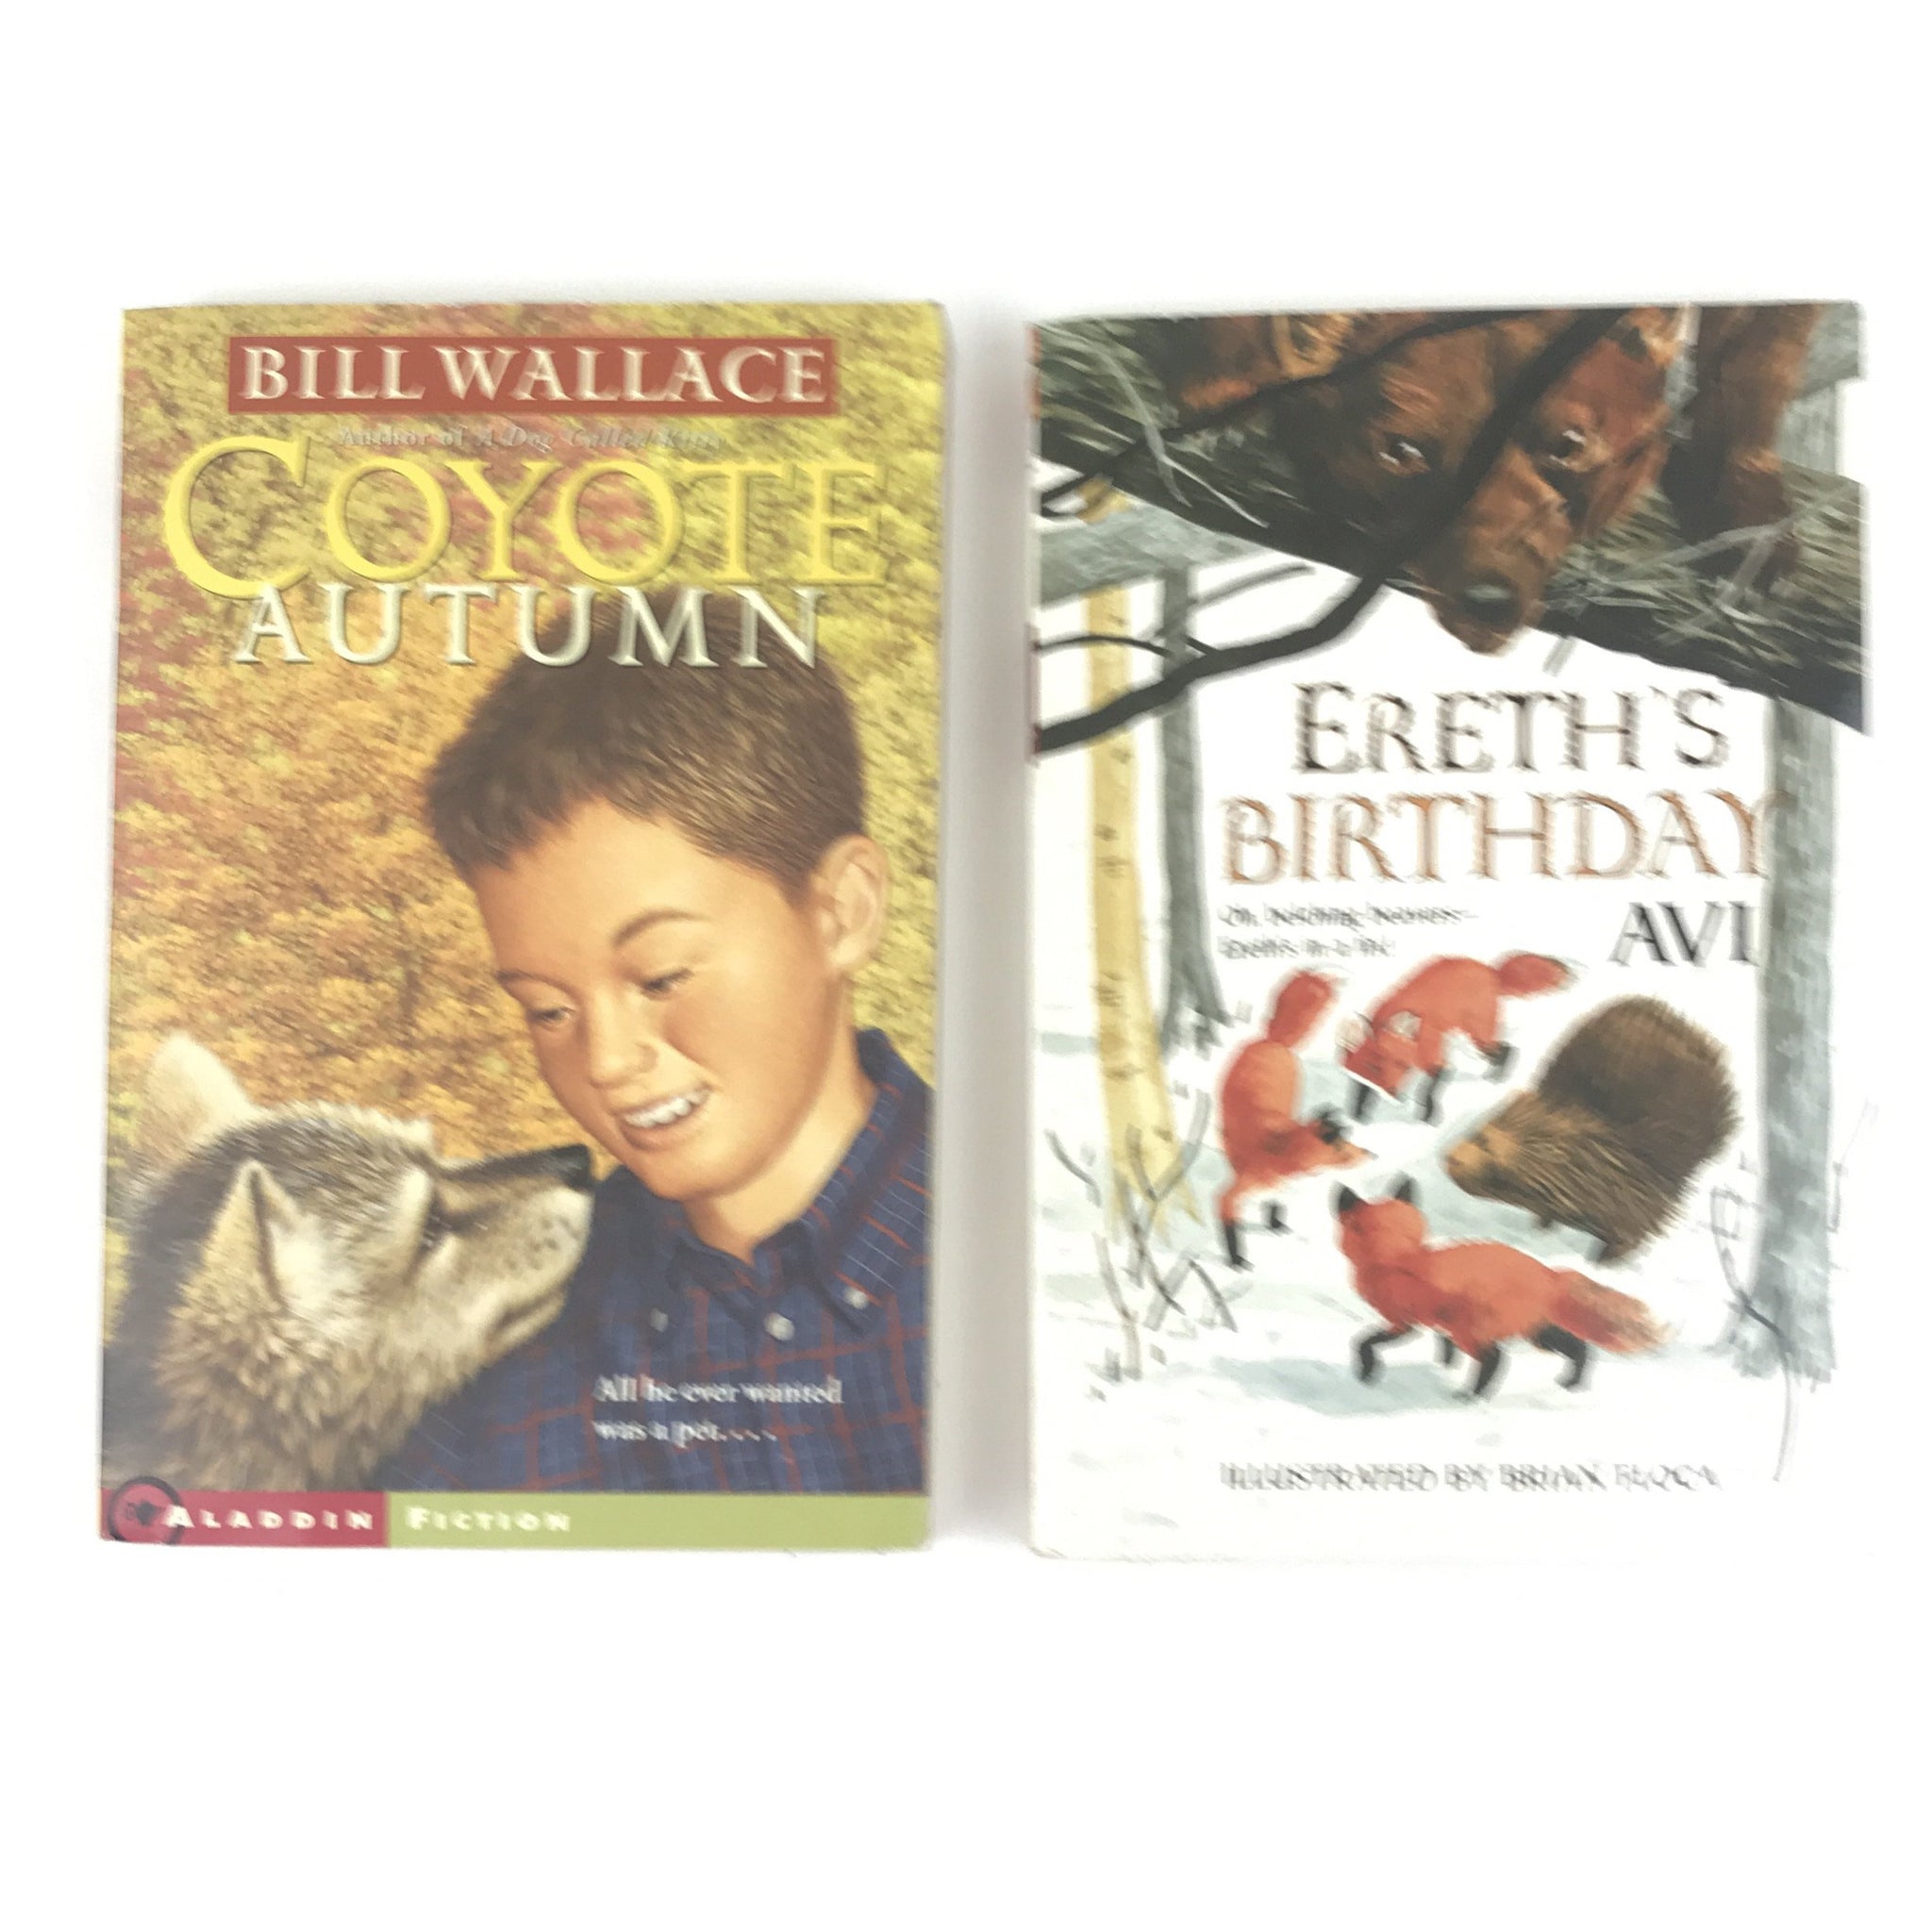 Ereths Birthday by Avi and Coyote Autumn by Bill Wallace - Lot of 2 Boy Books